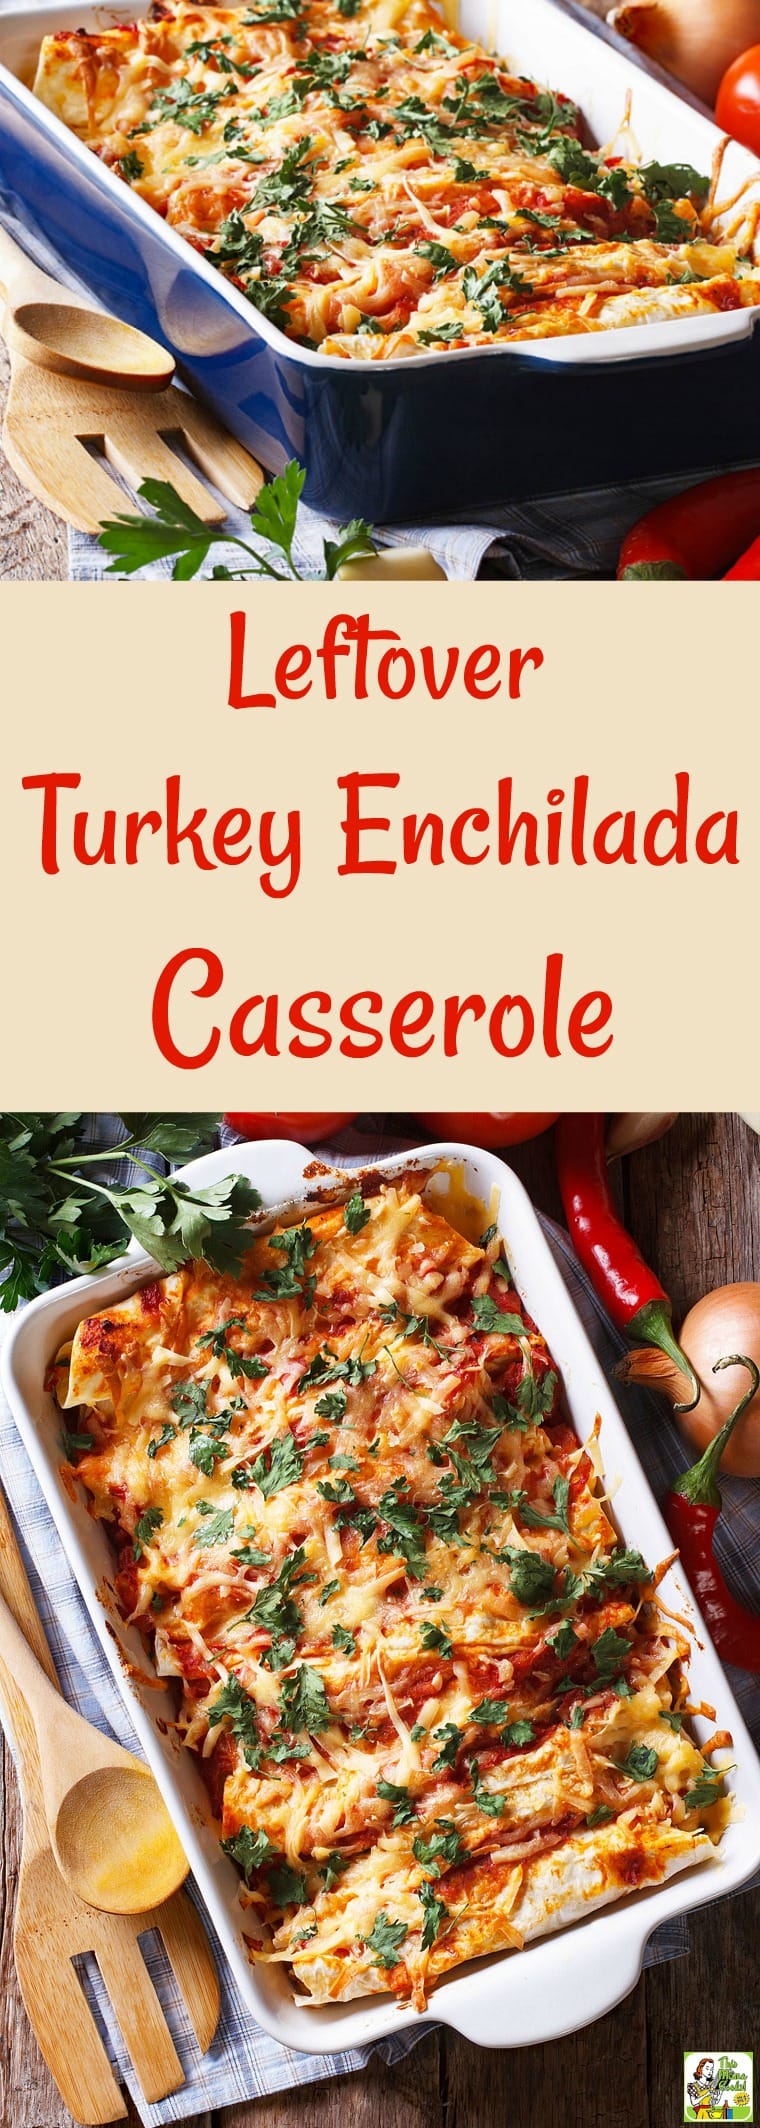 Got too much turkey? Make Leftover Turkey Enchilada Casserole! Try this turkey enchilada casserole recipe after Thanksgiving. This gluten free enchilada casserole recipe also works with many types of meats like shredded pork, beef, or ground taco meat. #turkey #thanksgiving #thanksgiving recipes #tacotuesday #taconight #casserole #mexicanfood #onepot #leftovers #recipe #easy #recipeoftheday #glutenfree #easyrecipes #enchiladas